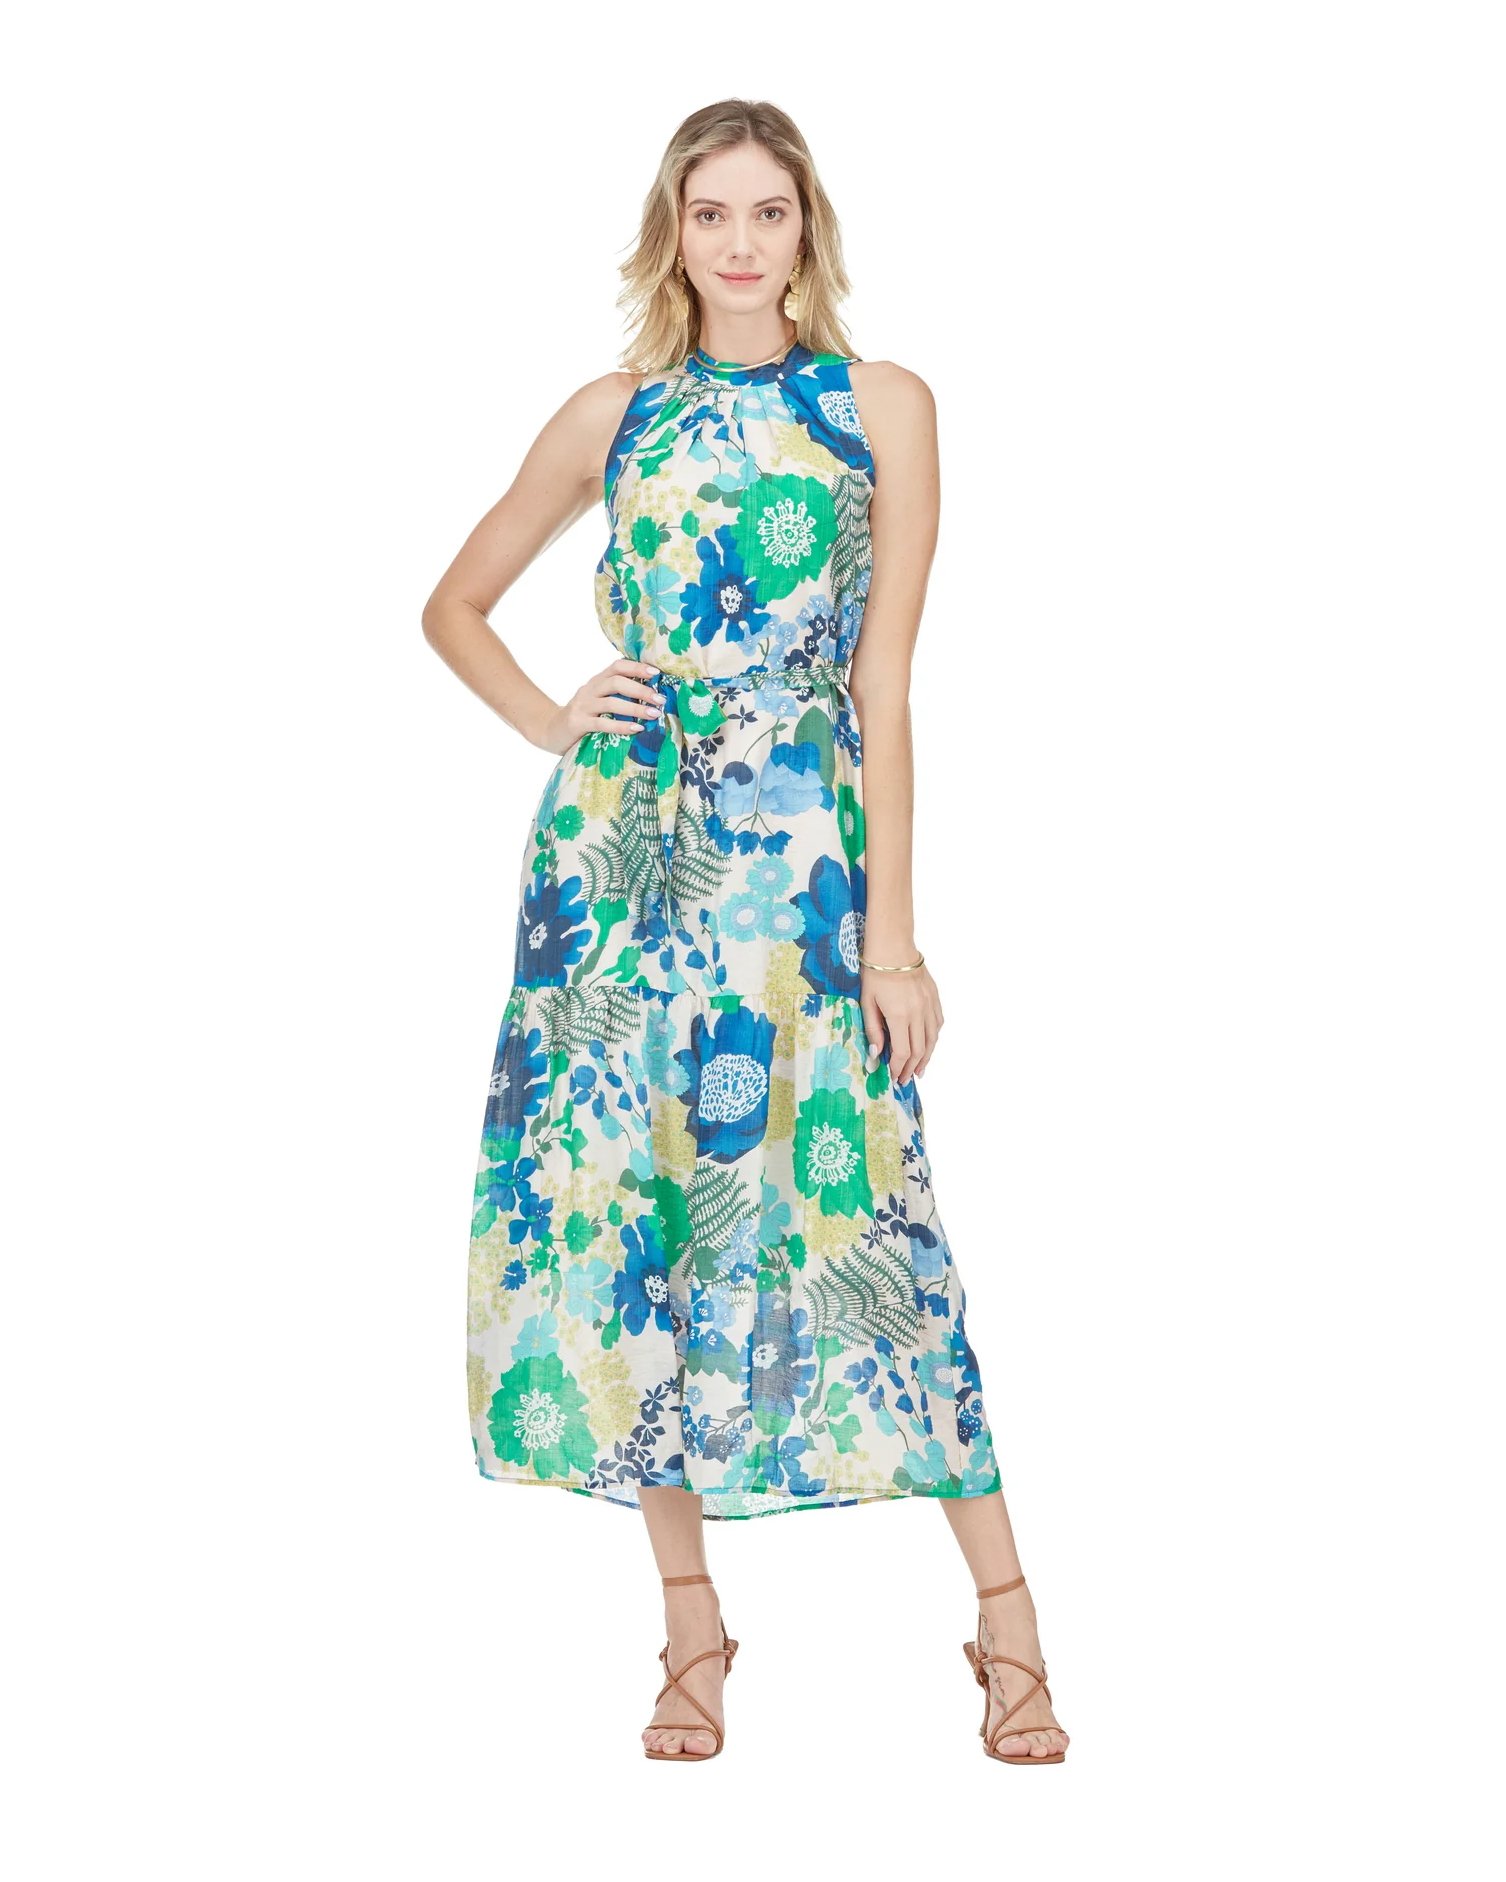 Shop our collection of dresses for spring featuring mood boosting florals and feminine silhouettes. #terianns #livelovemov #thinkfashion #springdresses #visitmariettaohio #mymarietta